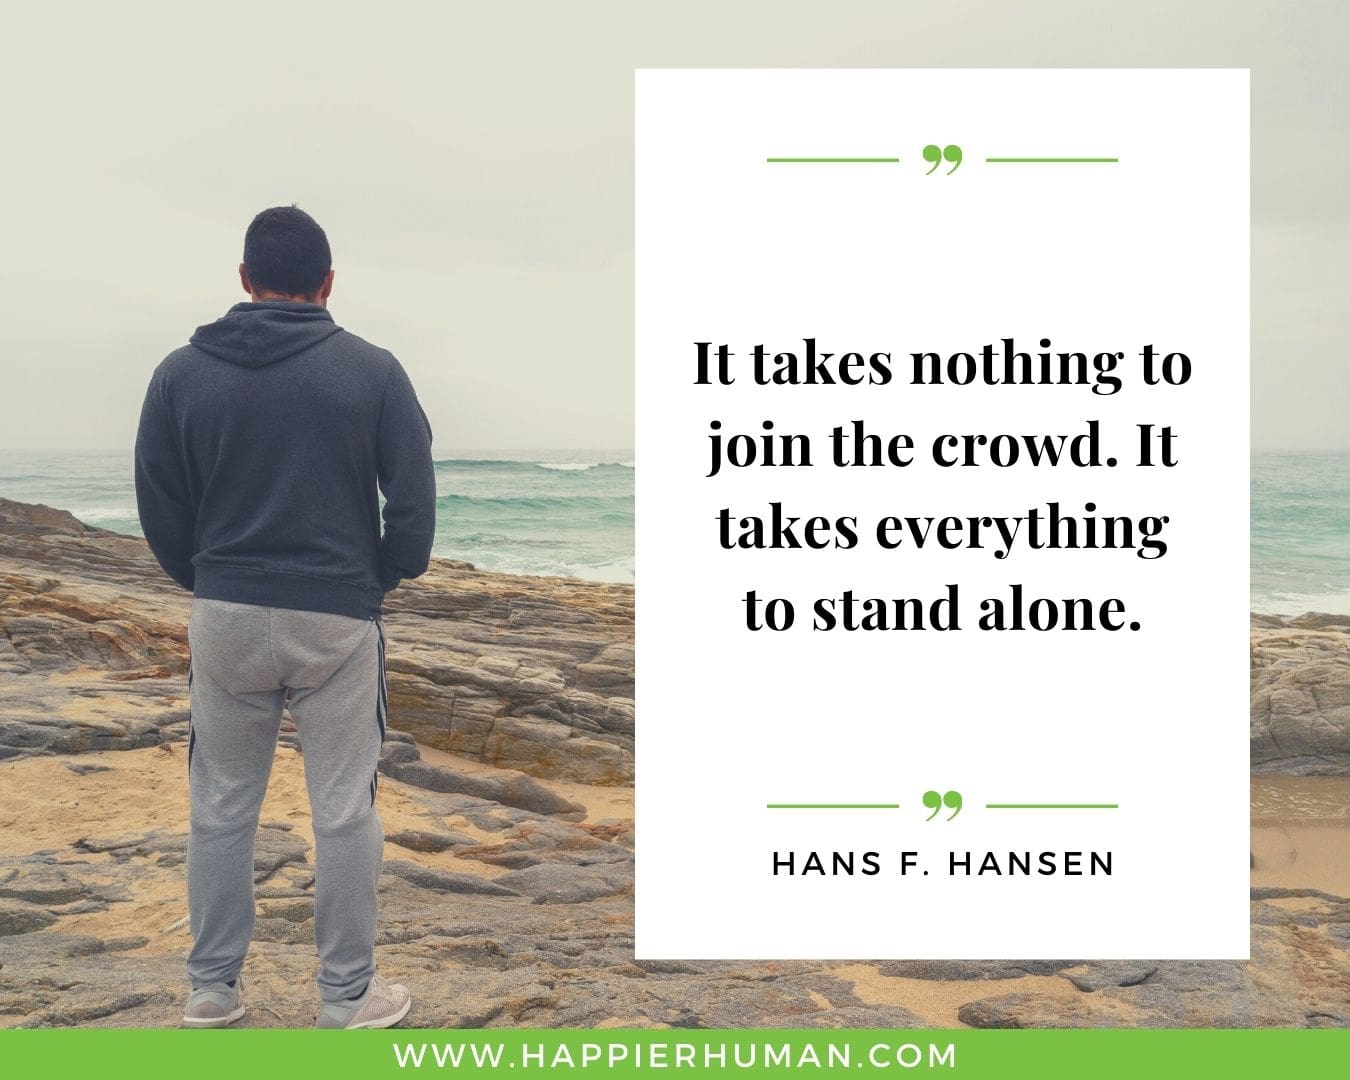 Loneliness Quotes - “It takes nothing to join the crowd. It takes everything to stand alone.” – Hans F. Hansen